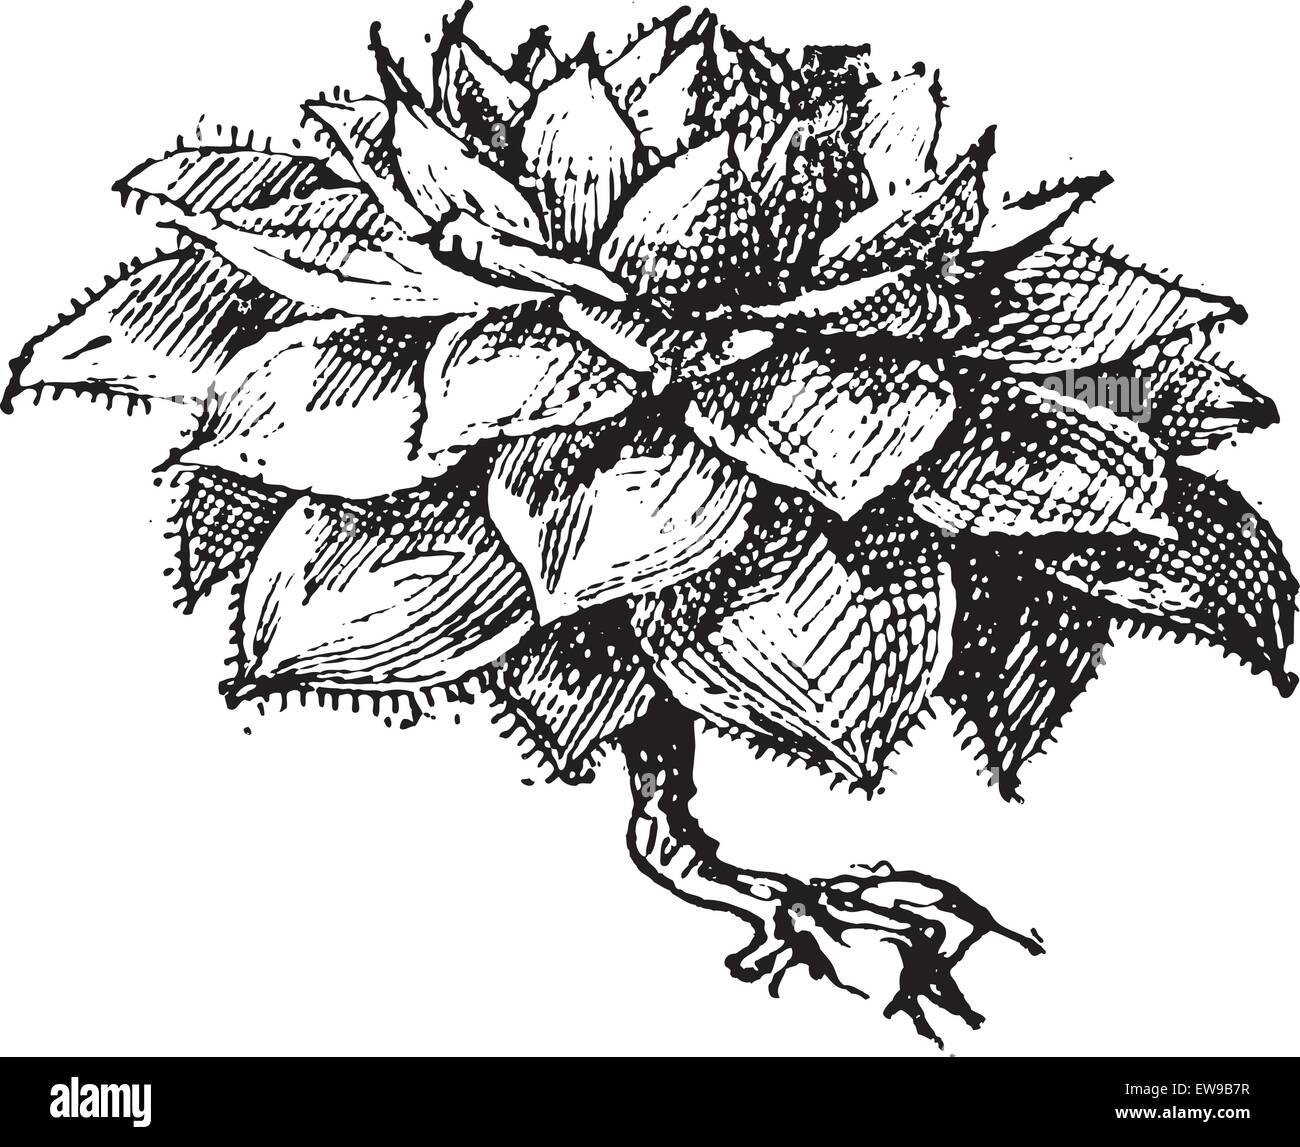 Houseleek or Sempervivum sp., vintage engraved illustration. Dictionary of Words and Things - Larive and Fleury - 1895 Stock Vector